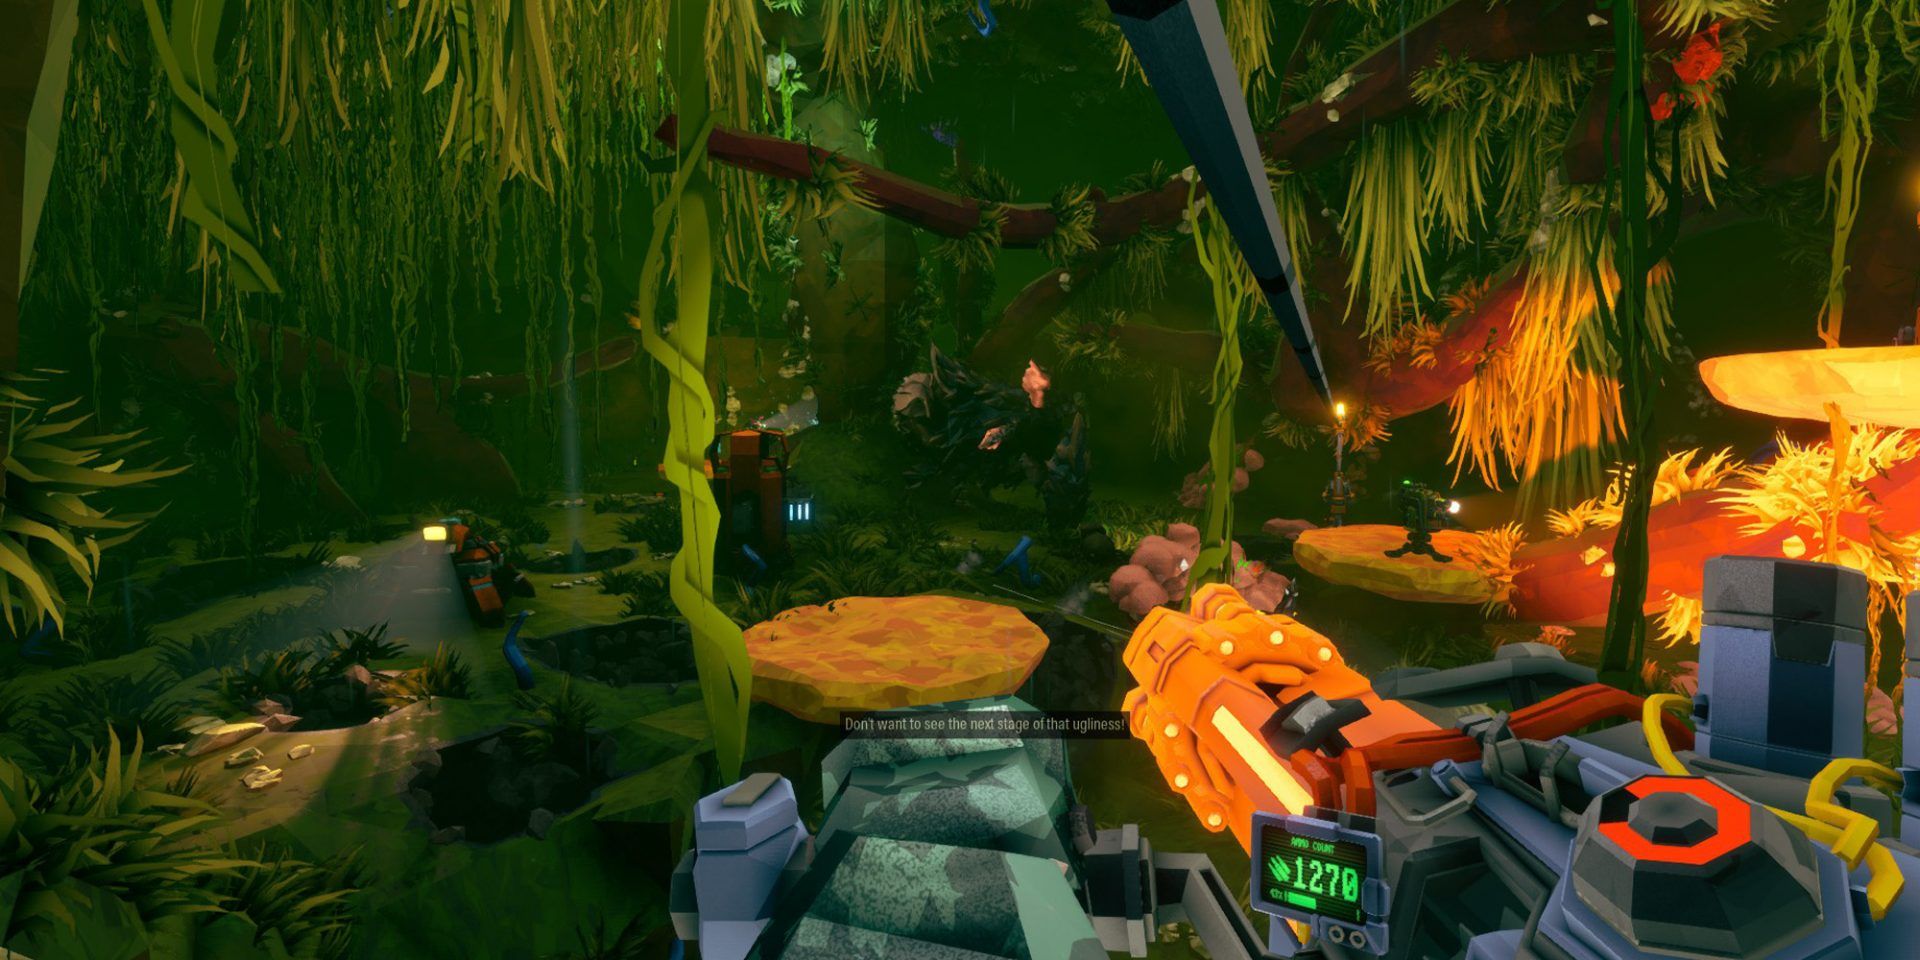 A Gunner in Deep Rock Galactic going down a zipline in an area covered in vines.